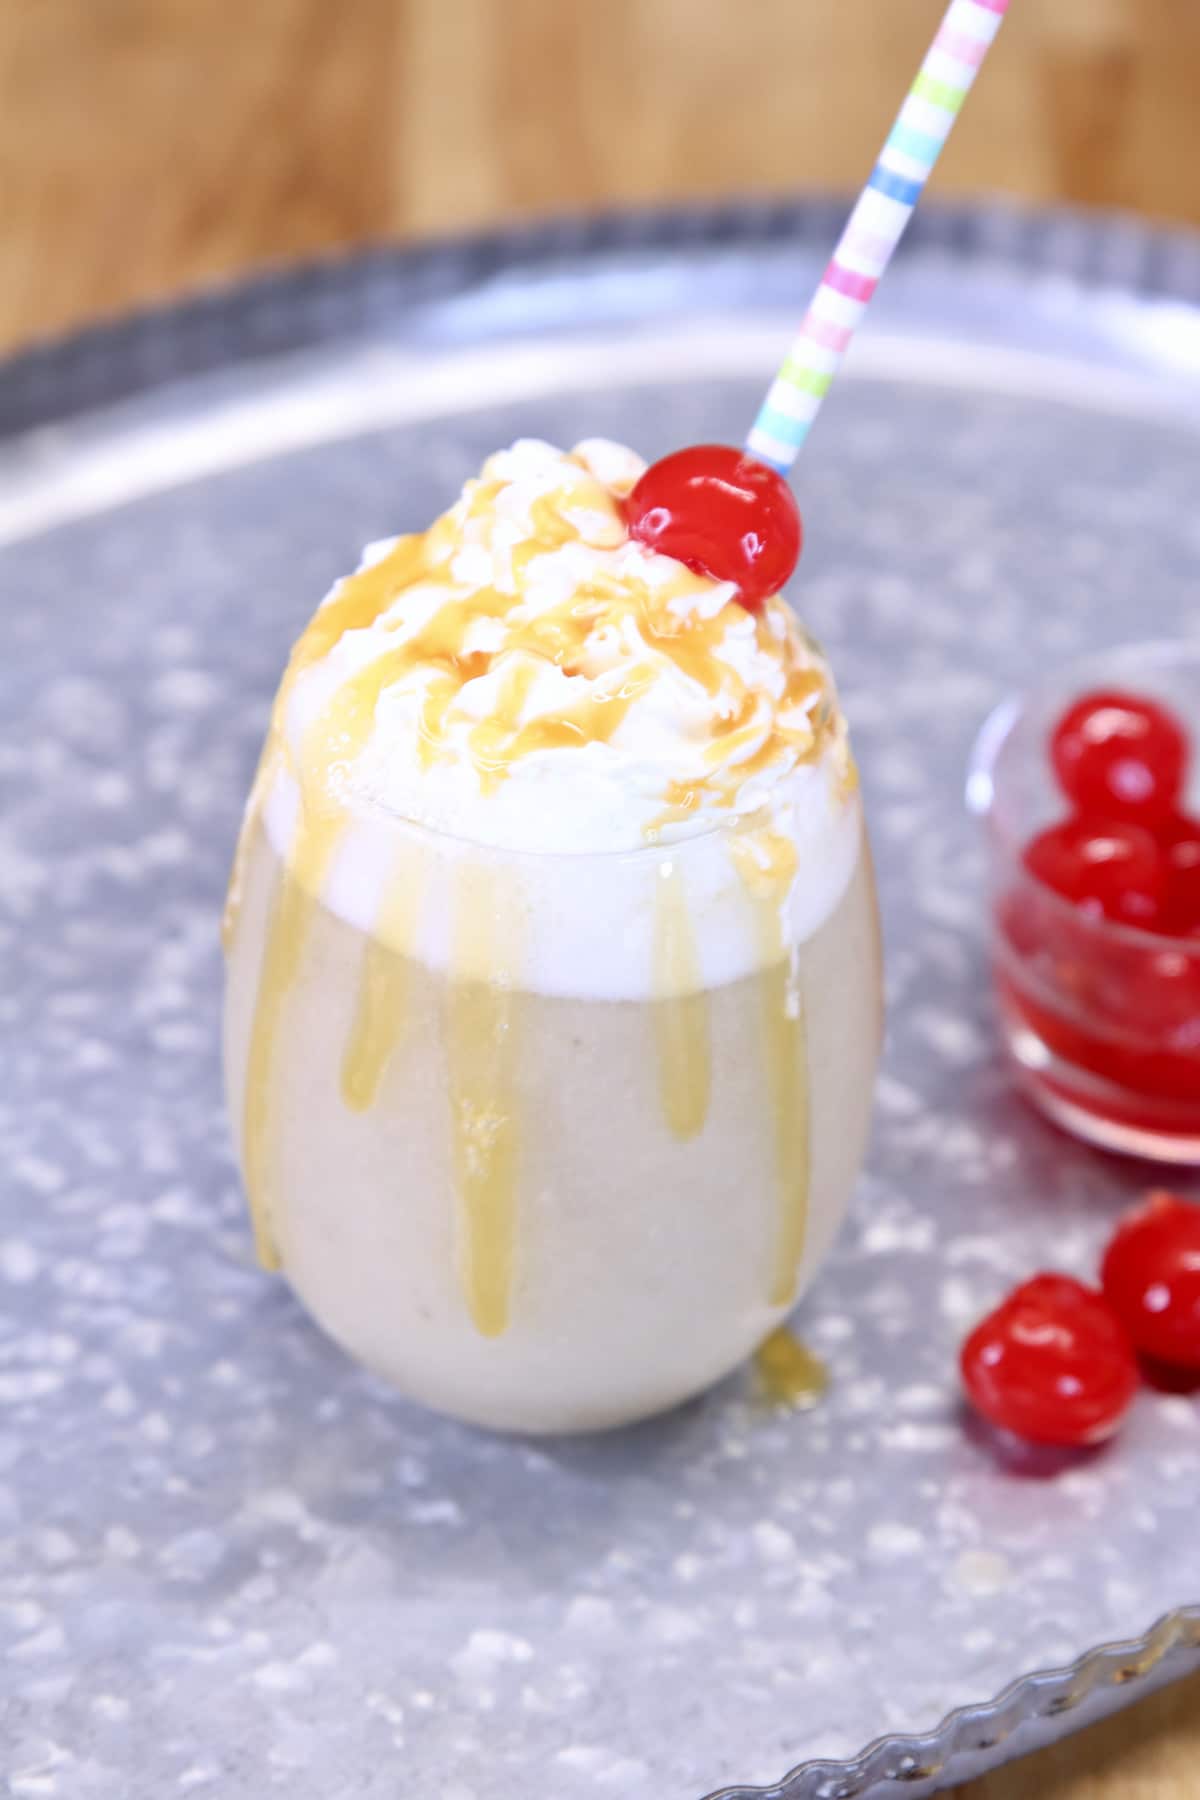 banana daiquiri with whipped cream, caramel sauce and a cherry on top.